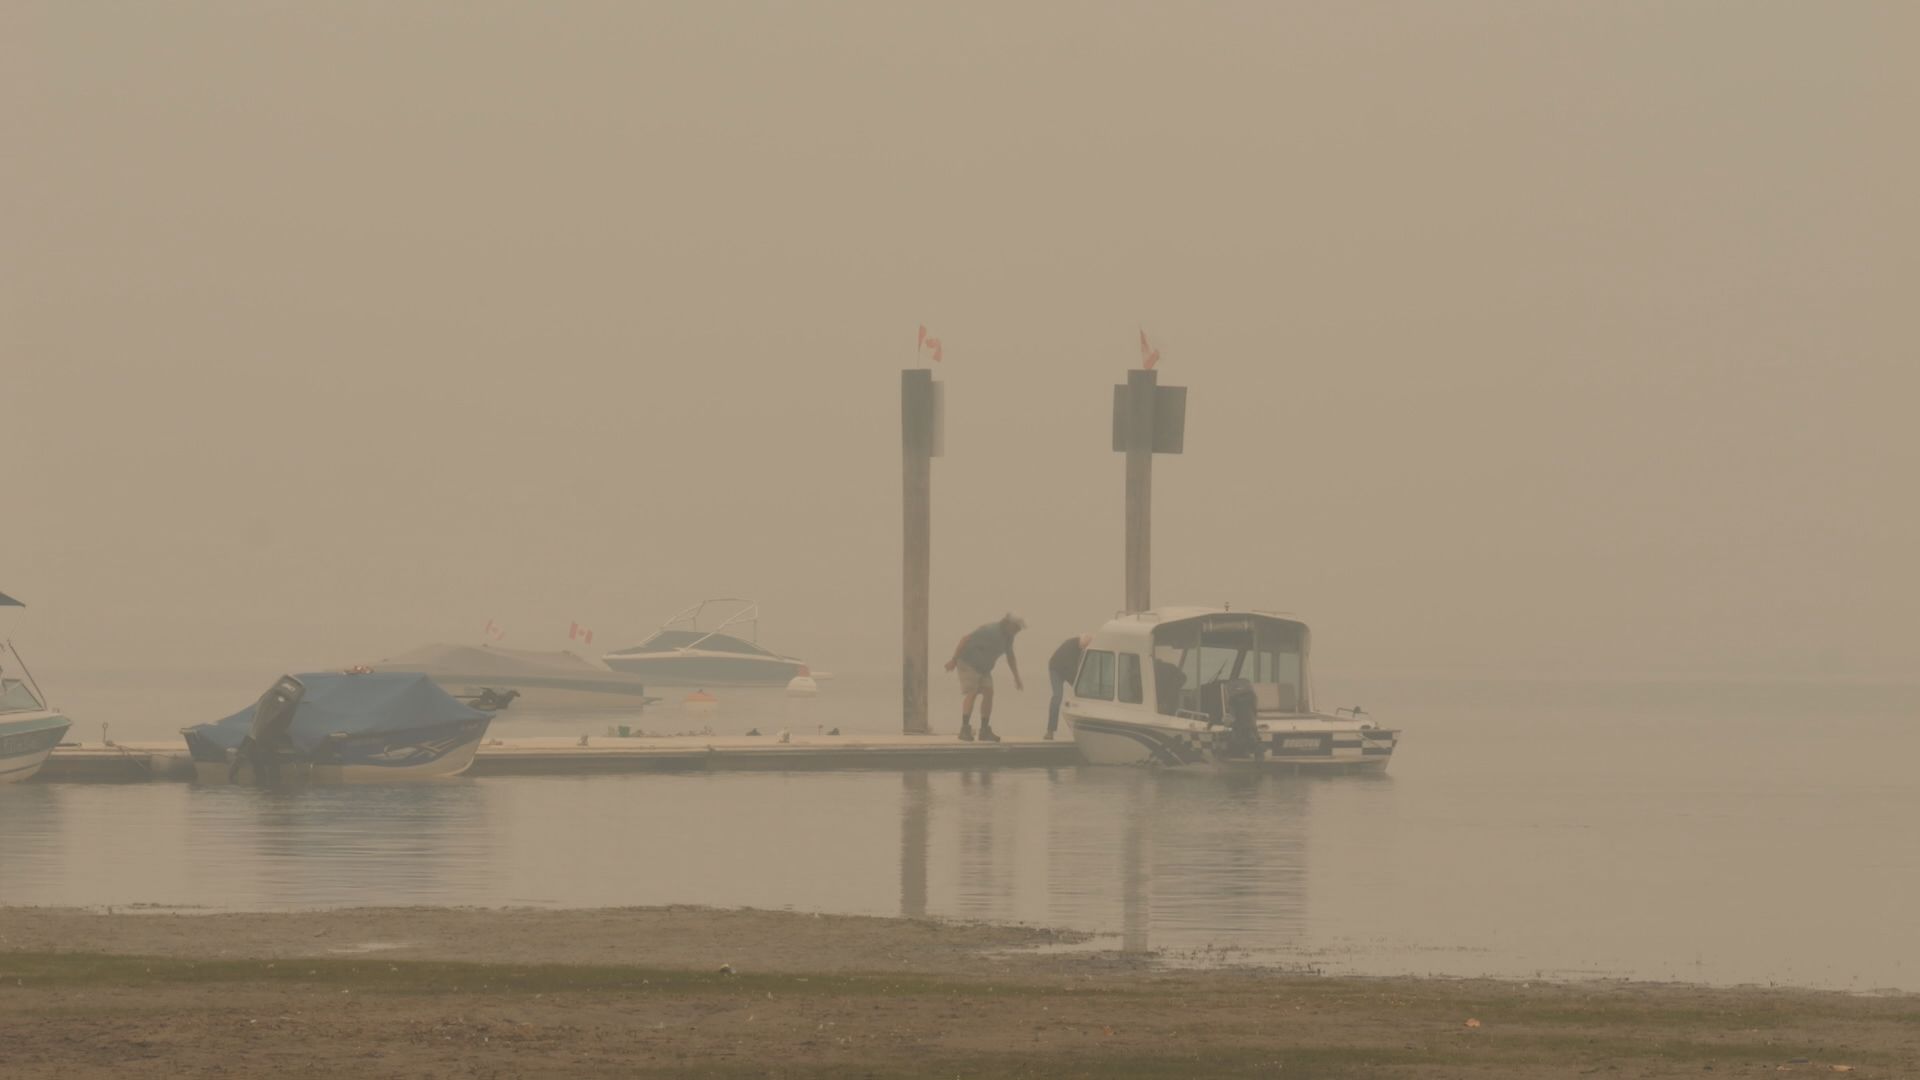 Boats are seen on Little Shuswap Lake in Chase, B.C. as the air is filled with smoke.